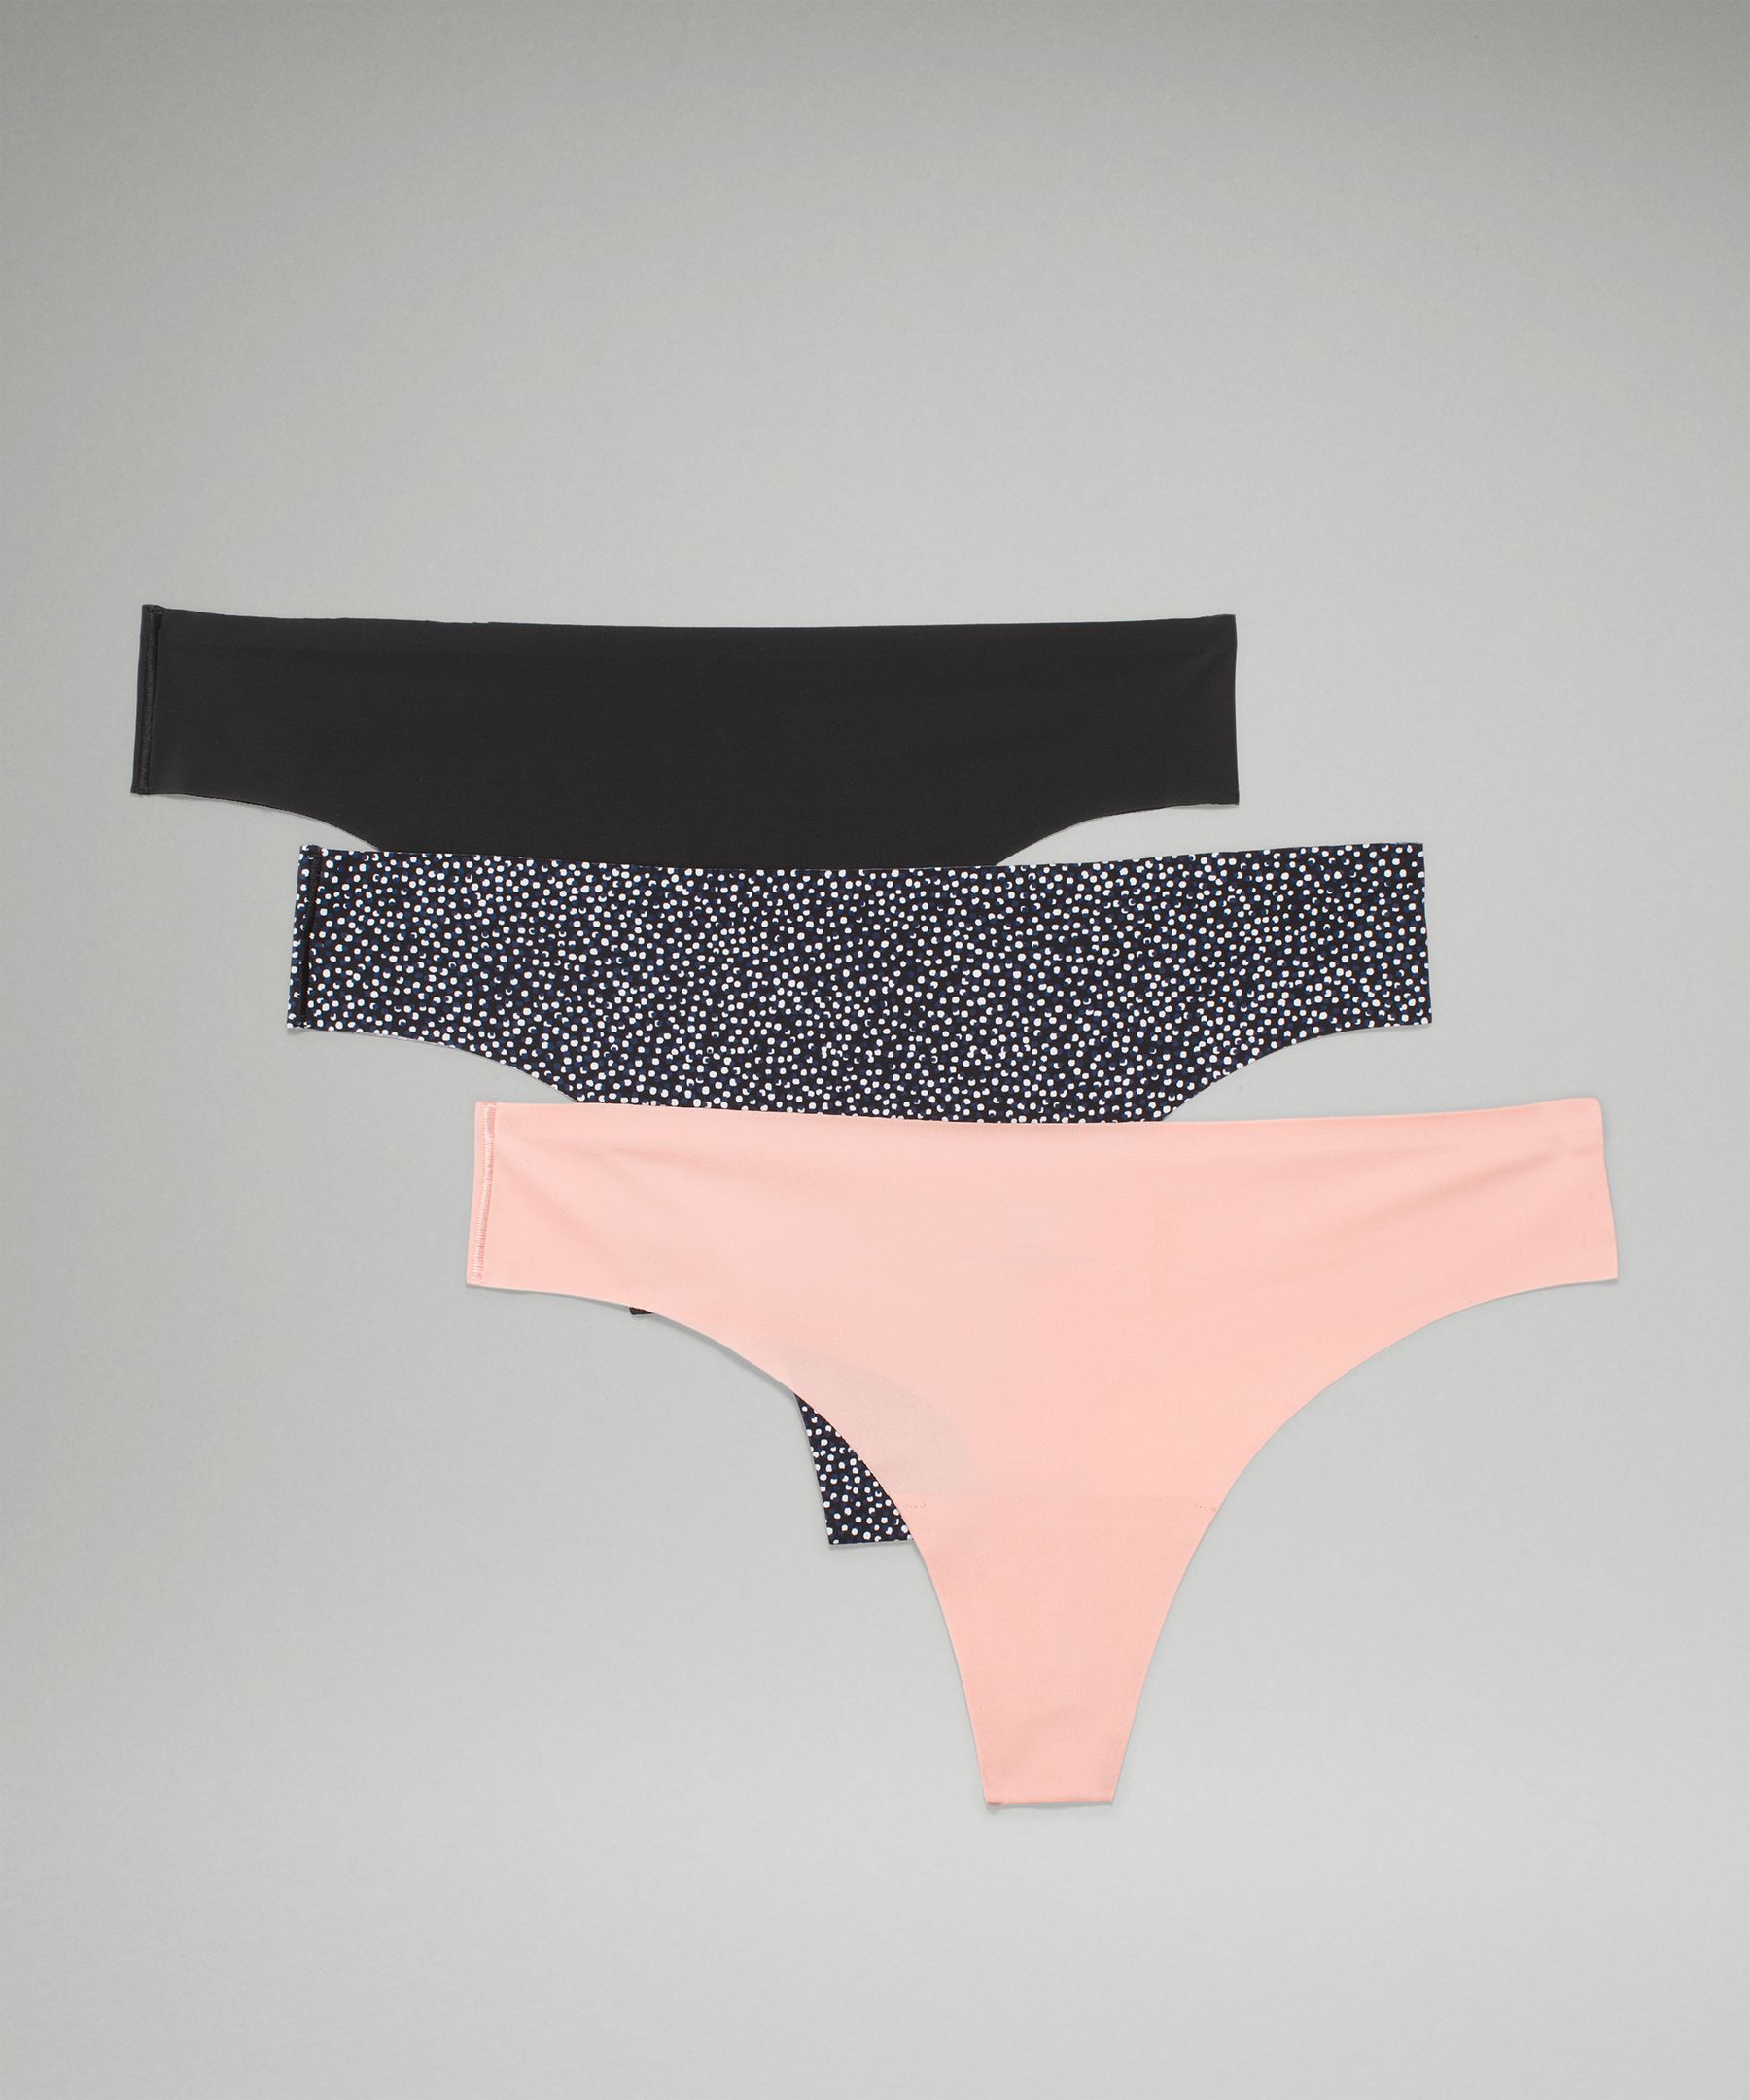 Lululemon Invisiwear Mid-rise Thong Underwear 3 Pack In Black/pink Mist/double Dimension Starlight Black